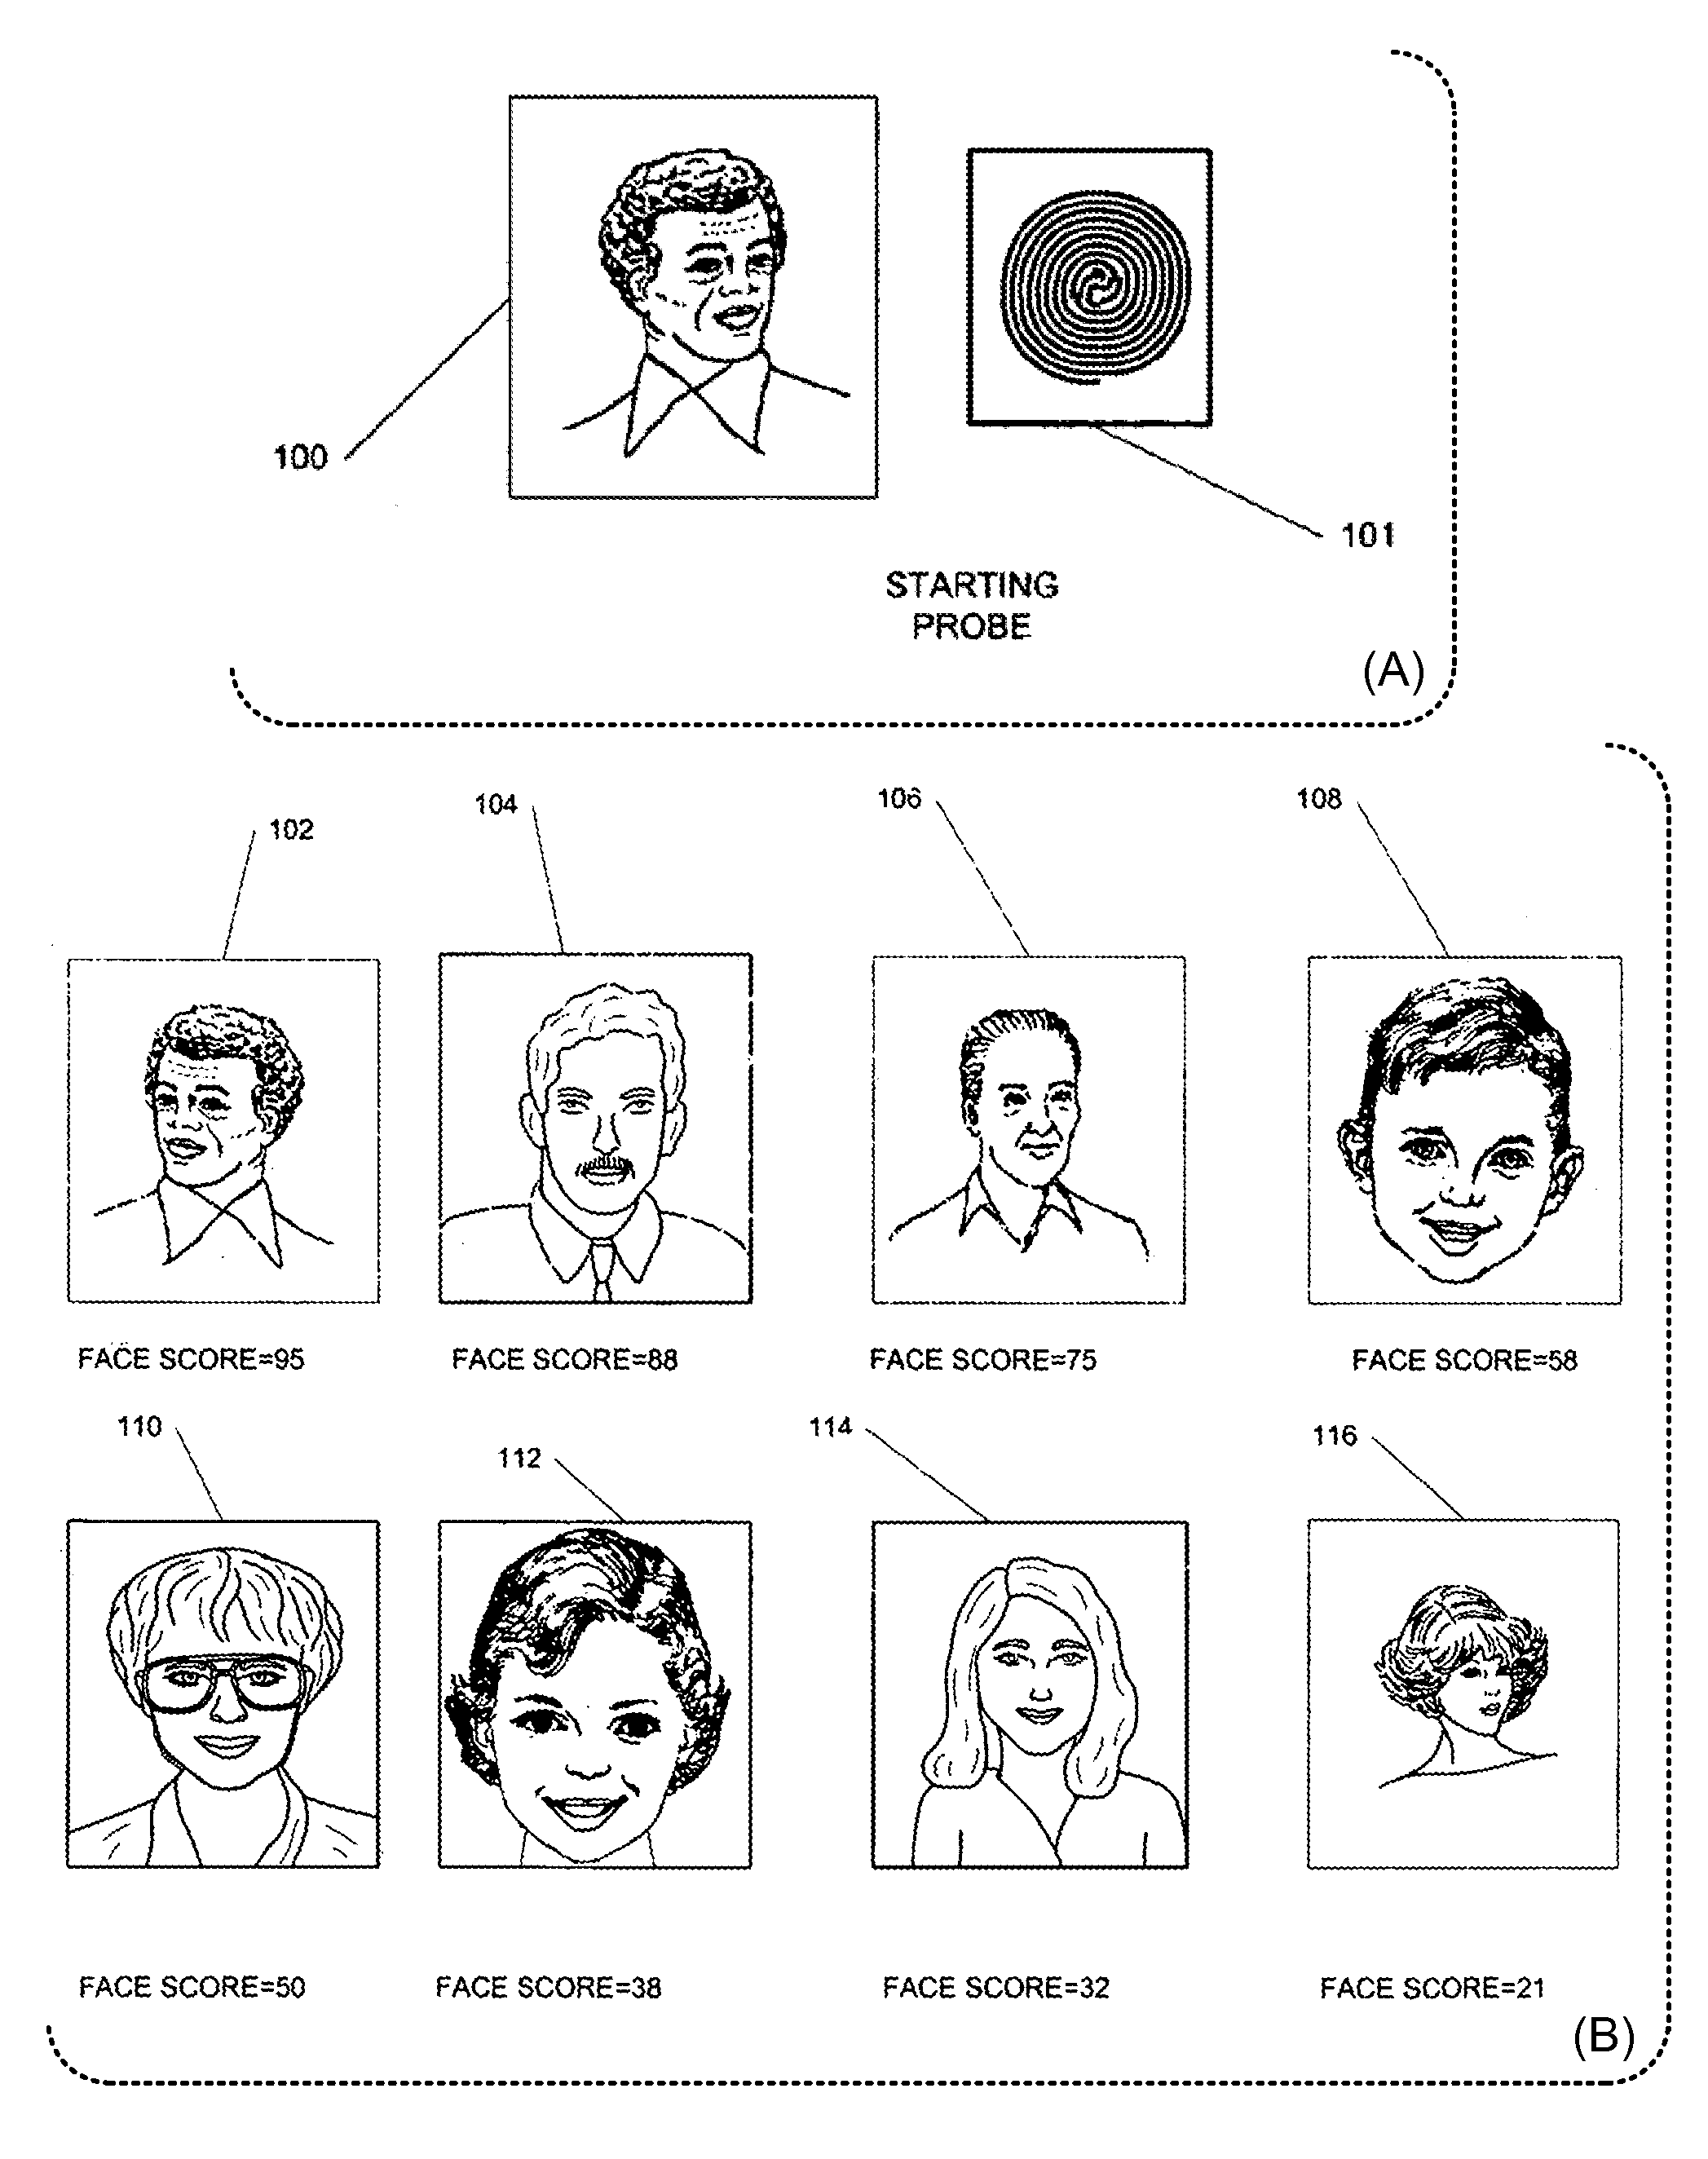 Systems and methods for managing and detecting fraud in image databases used with identification documents